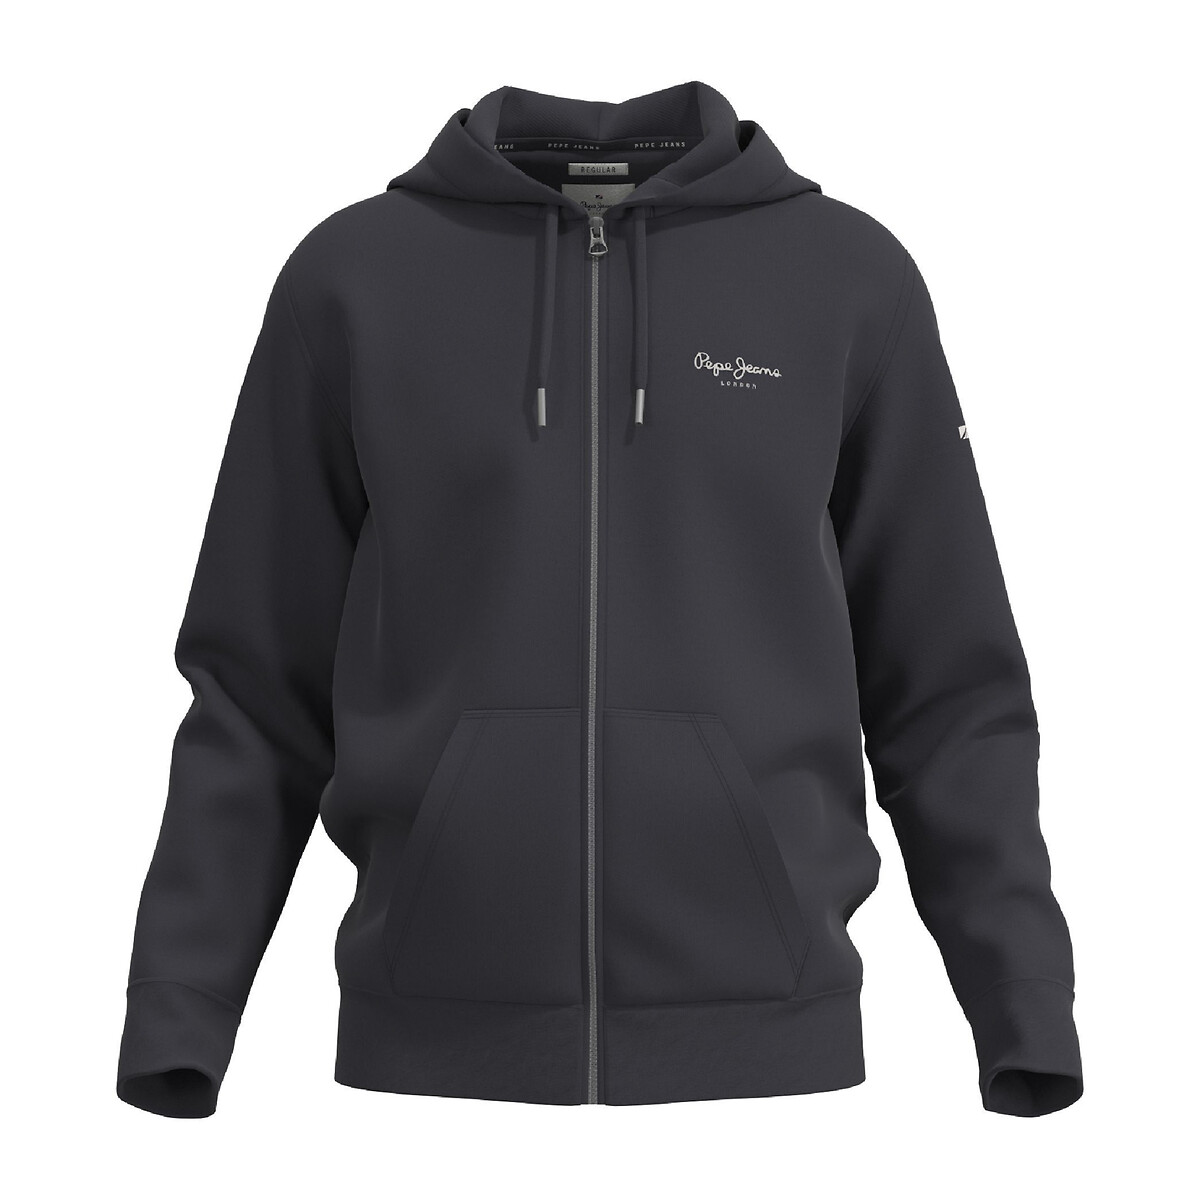 embroidered logo cotton hoodie with zip fastening